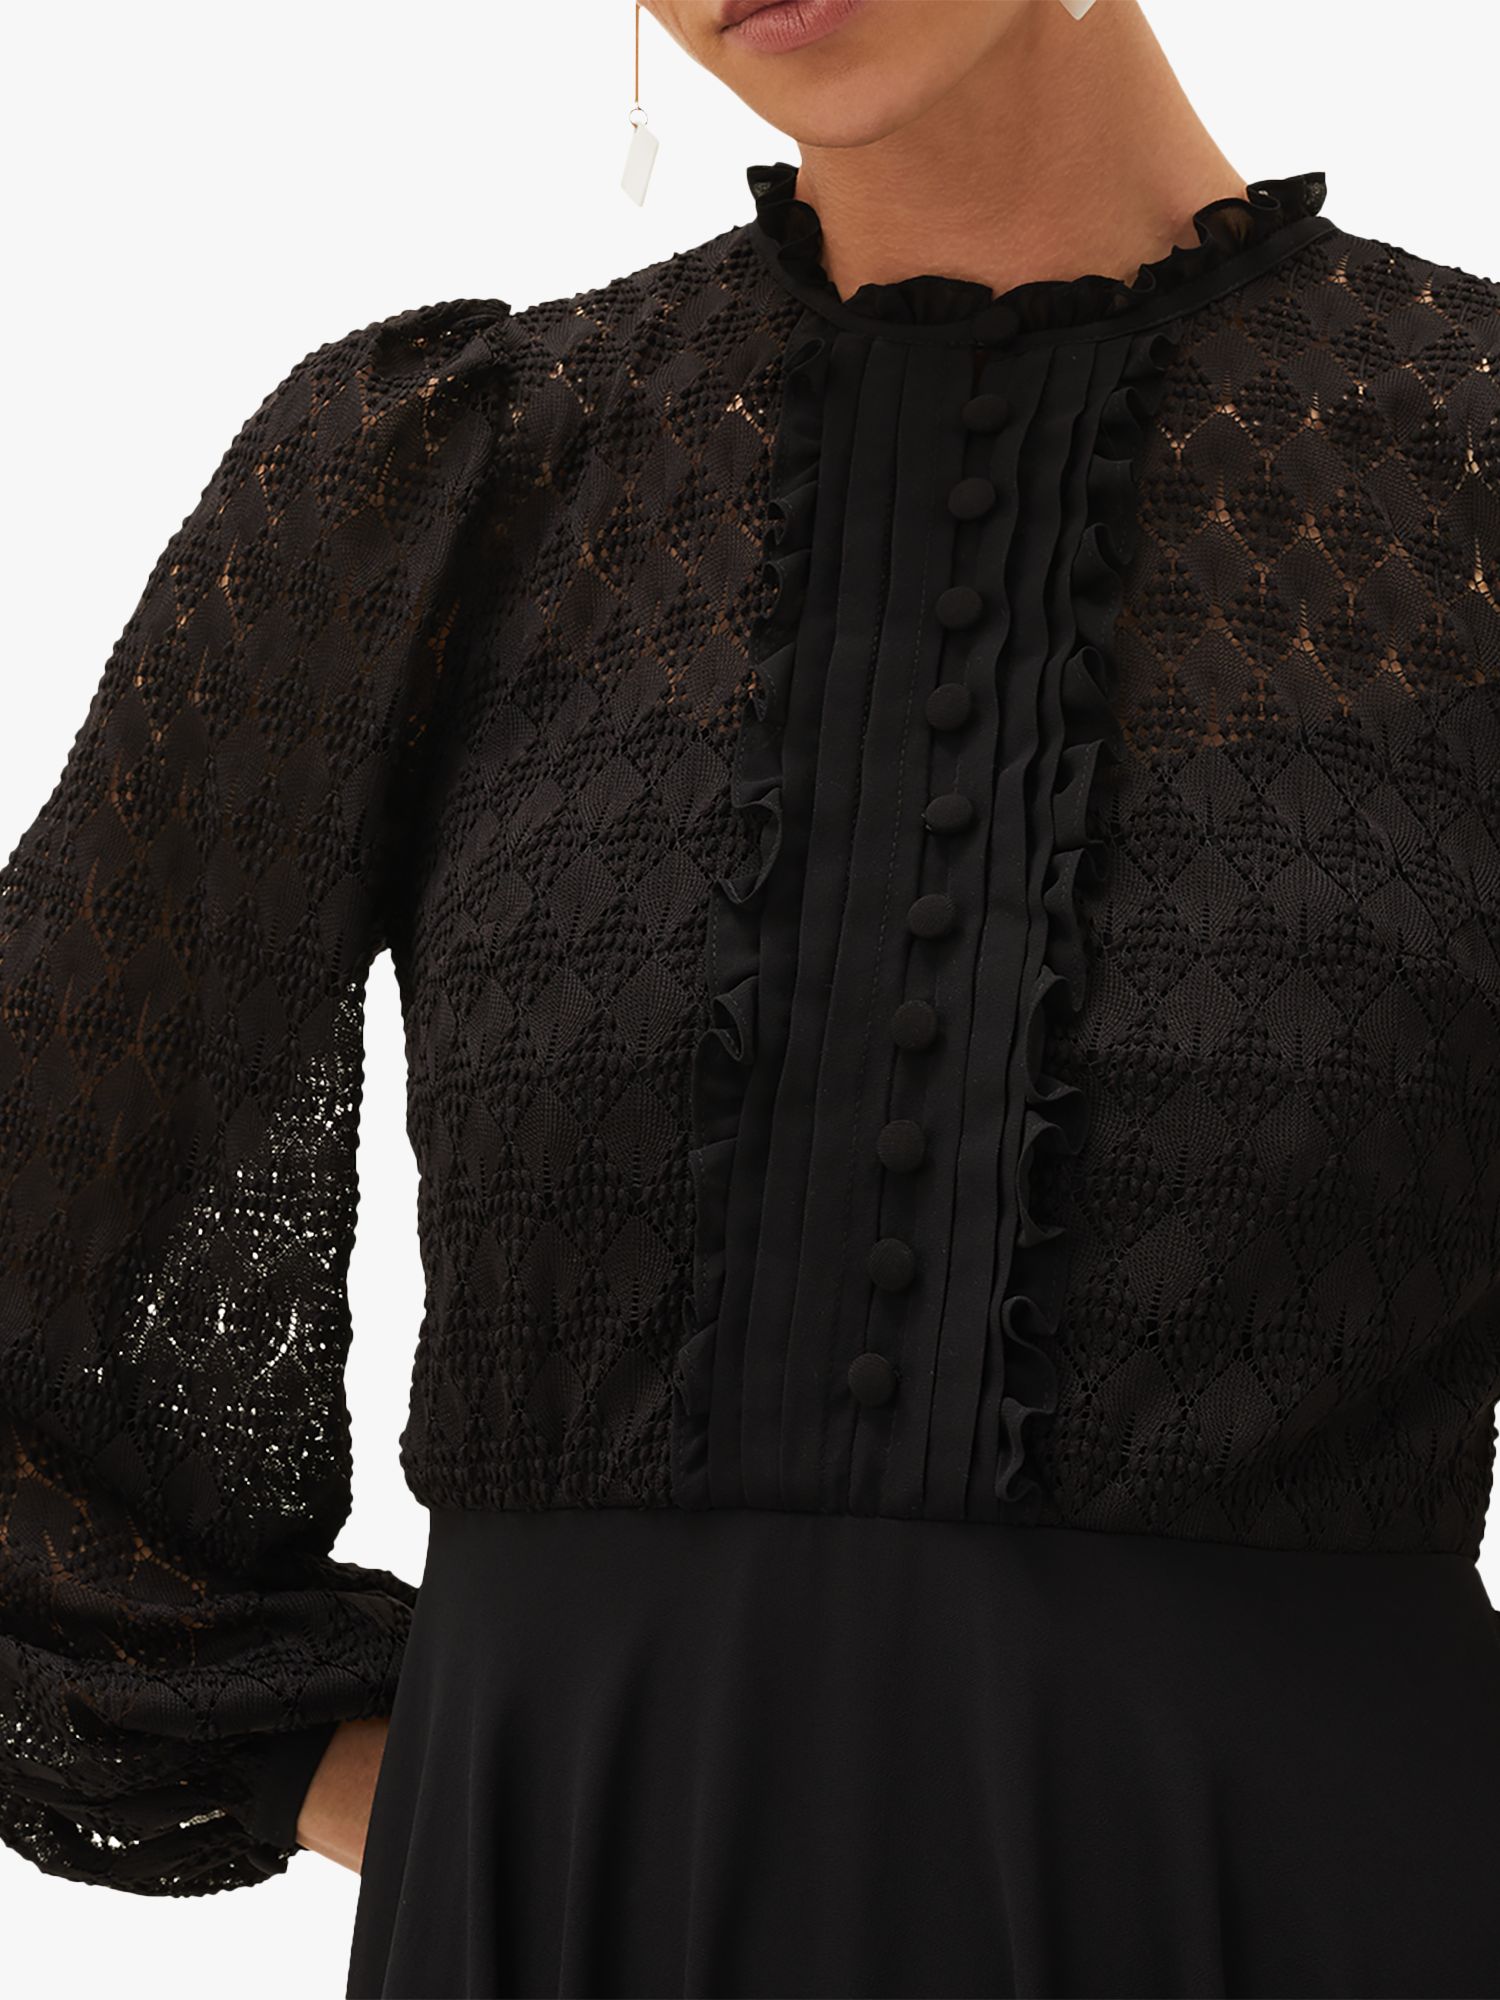 Phase Eight Leonore Lace Bodice Dress, Black at John Lewis & Partners